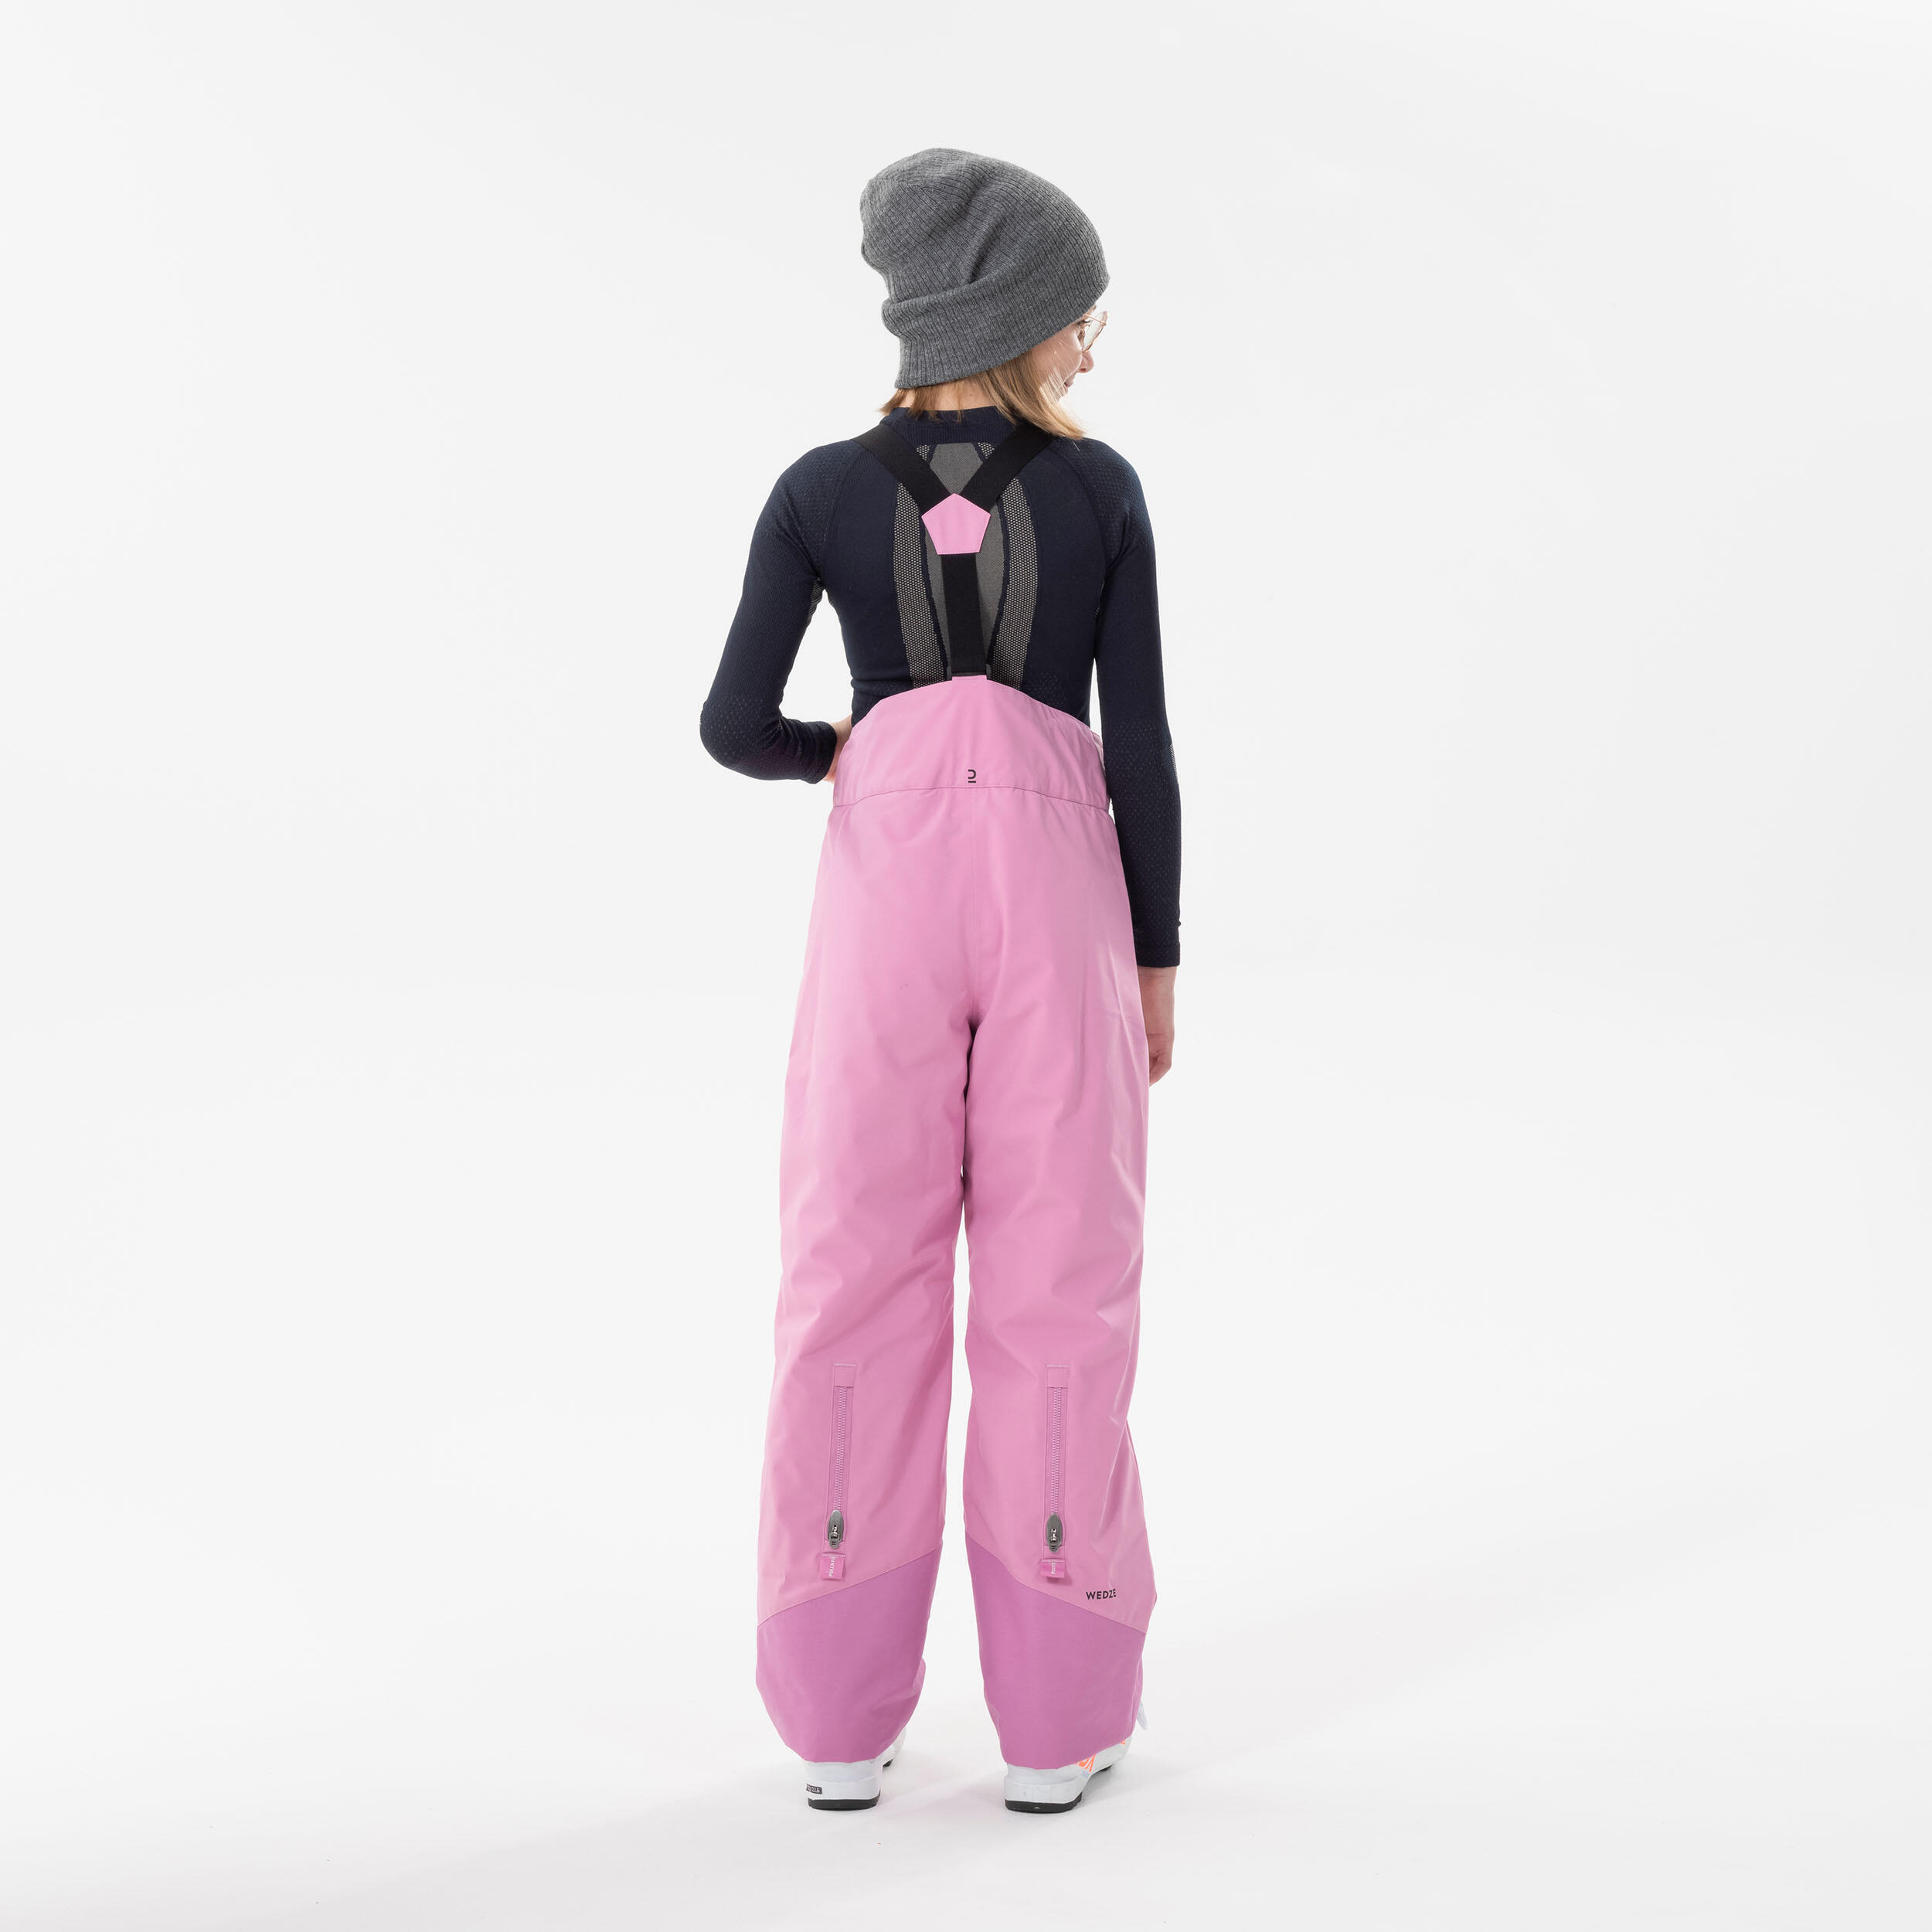 KIDS’ WARM AND WATERPROOF SKI TROUSERS  - 500 PNF - PINK  7/12